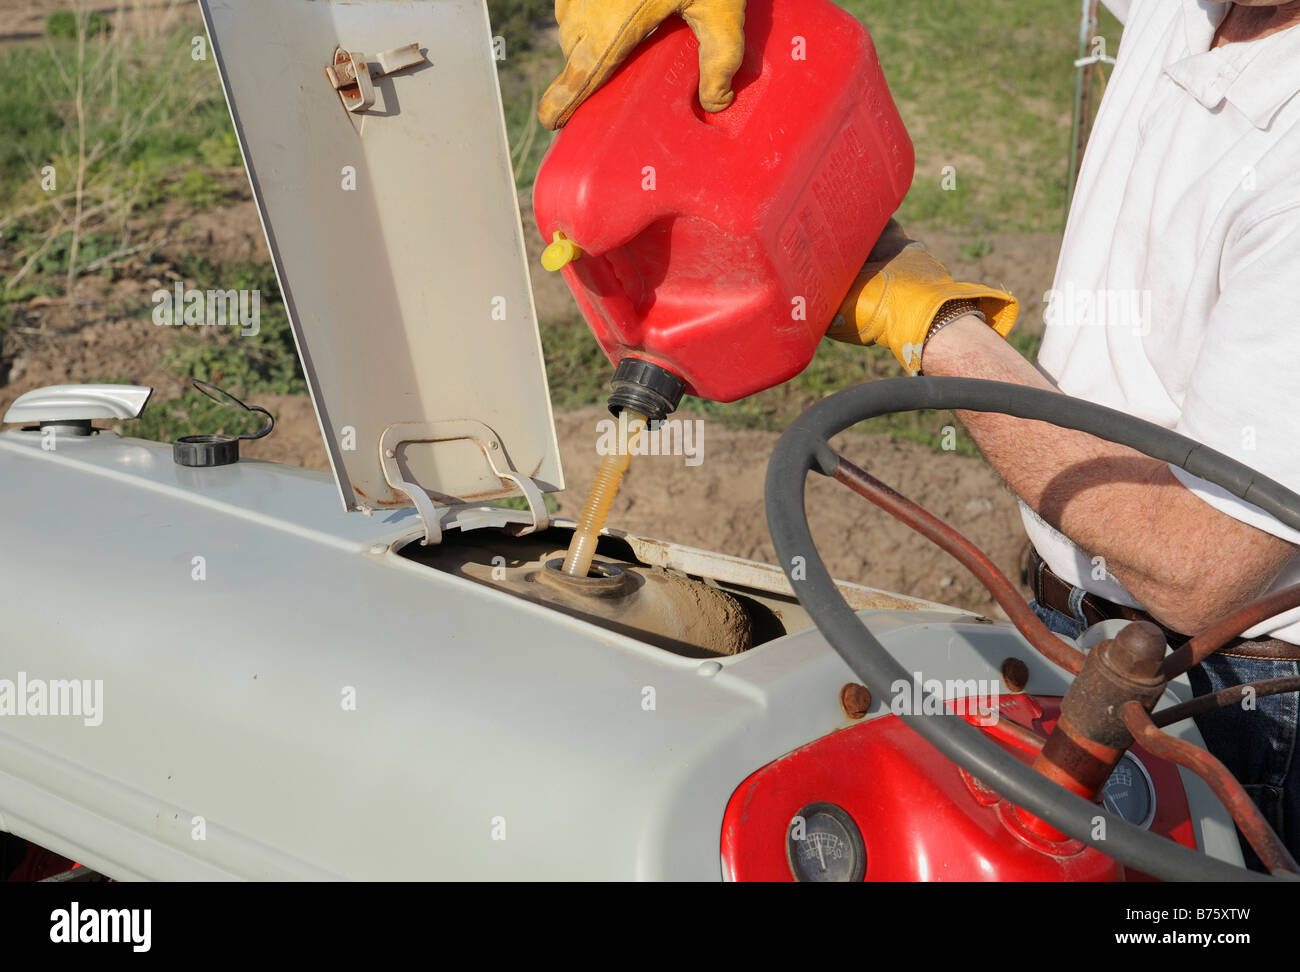 farmers hands refueling a tractor from red gas can Stock Photo